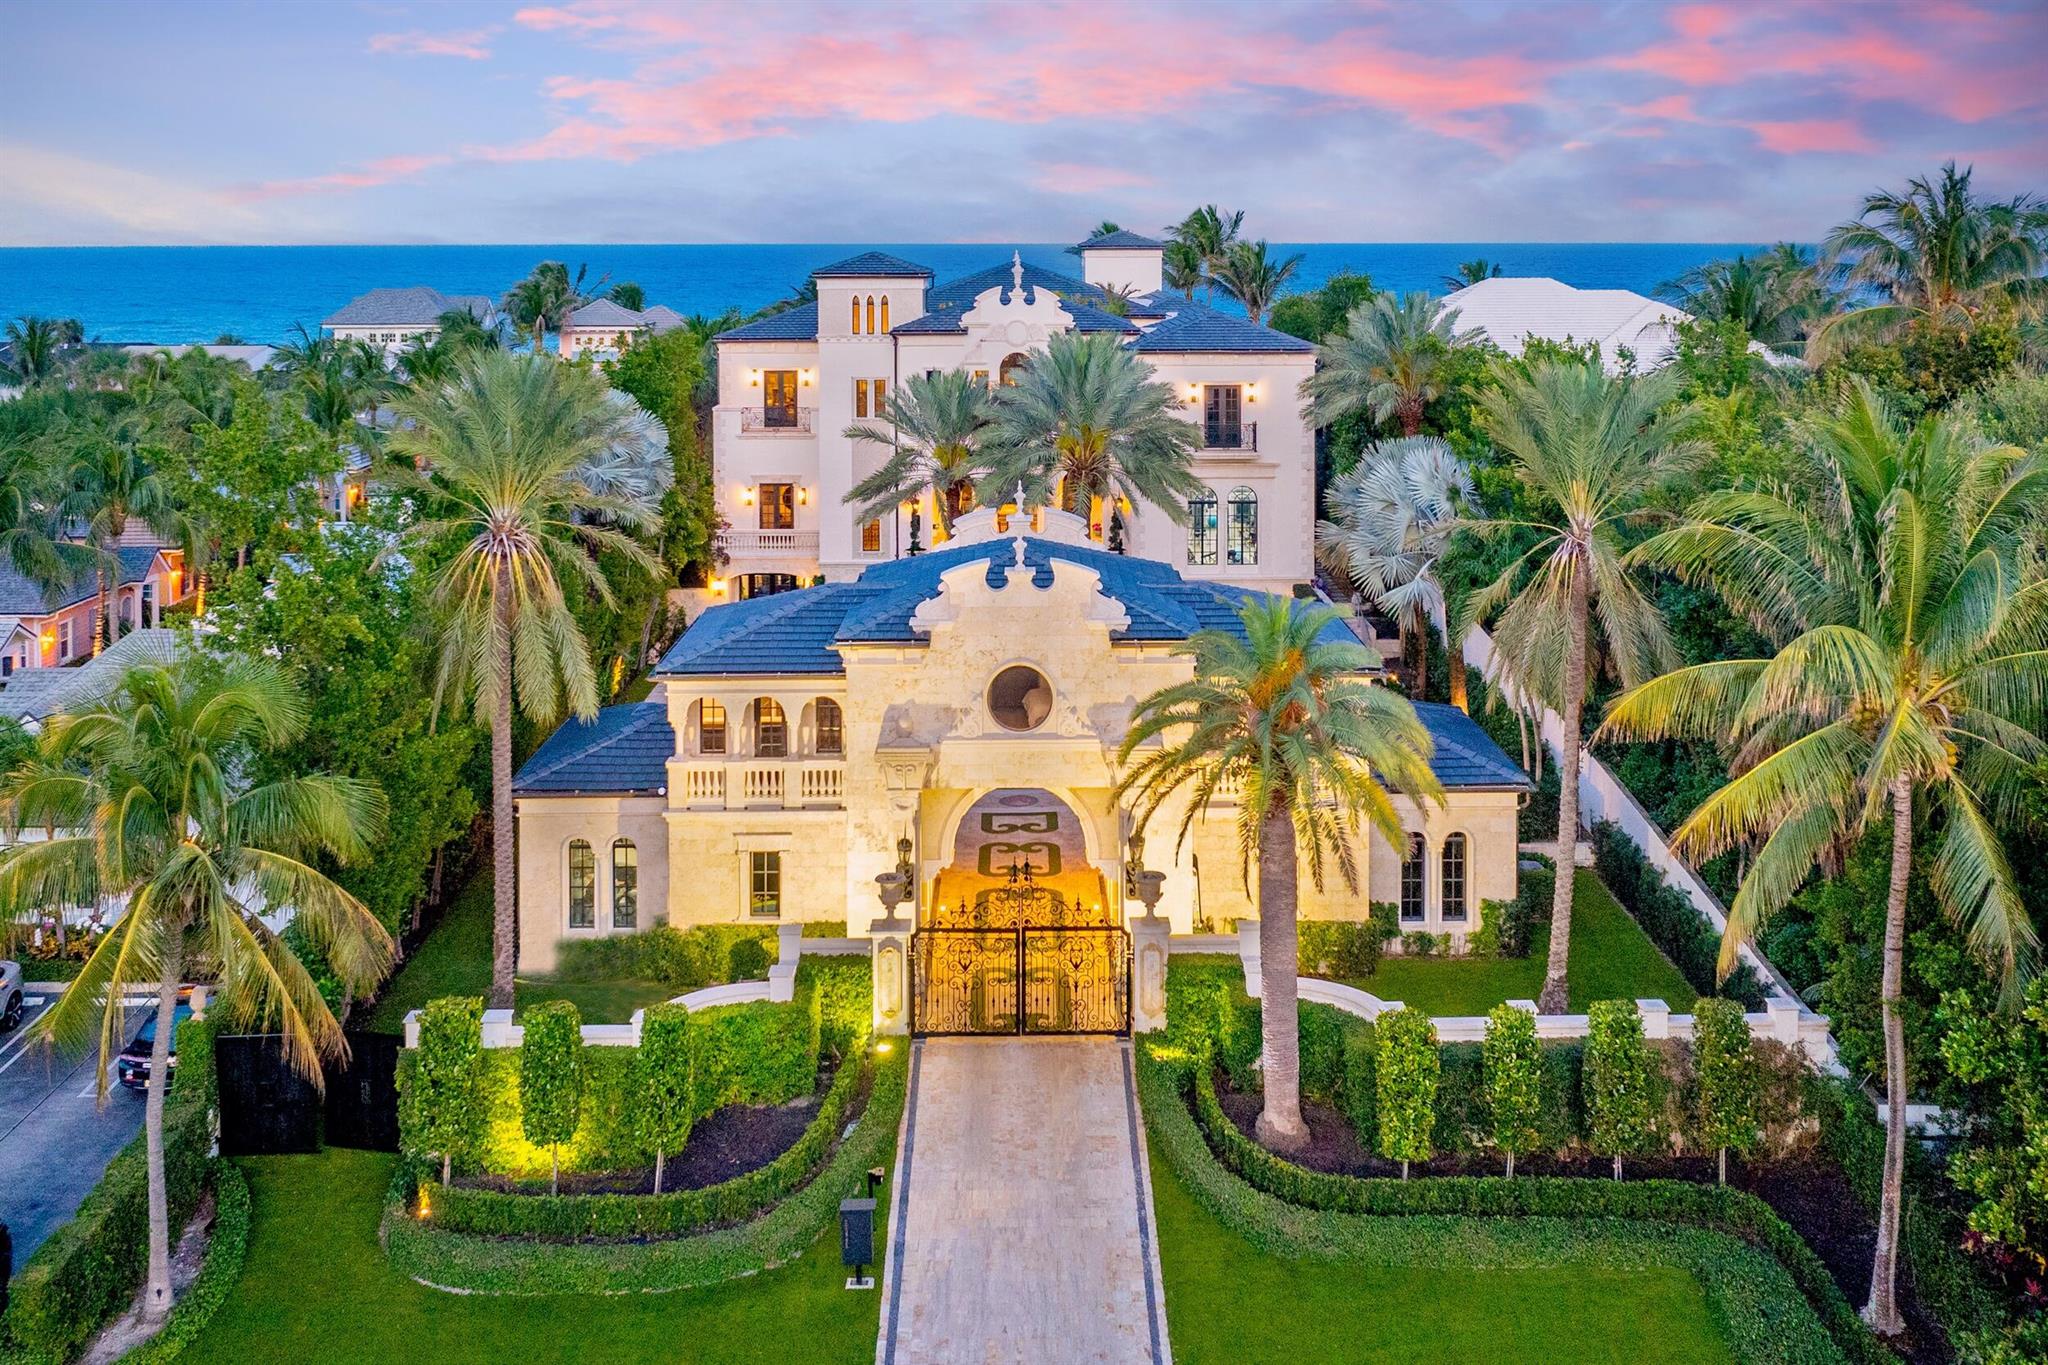 ''Mar Pietra'' stands as a bespoke palatial masterpiece, recognized as one of South Florida's finest oceanfront estates. This trophy home epitomizes contemporary Italian Renaissance opulence, showcasing the pinnacle of luxury through the world's finest materials, craftsmanship, and architectural ingenuity. Brilliantly staged behind private gates, the sprawling Mar Pietra compound at 2325 S Ocean Boulevard in Delray Beach boasts a rare one acre oceanfront sanctuary, featuring an expansive lawn stretching to the sand and a resort-style pool, creating an unparalleled retreat. An aura of sophistication and grandeur graces the exterior spaces where the interplay of impeccable gleaming limestone from Yucatan, lush tropical landscaping, and the captivating elements of fire and water converge against the backdrop of pristine ocean vistas.

A palpable sense of sophistication and grandeur graces the exterior spaces, This unique fusion culminates in an unparalleled setting, boasting a resort-style pool, cascading water features, an elevated lounge area with a spa jacuzzi, and bespoke mosaic inlays that adorn every corner.
Embark on a journey through an outdoor haven reminiscent of the splendor of the Vizcaya Museum and Gardens in Miami, where every detail is meticulously crafted to evoke a sense of majestic beauty and timeless elegance.

The grandeur of Mar Pietra unfolds within its vast 31,387-square-foot expanse, encompassing 23,136 square feet under air. Inside, a sanctuary of luxury awaits, boasting nine-bedroom suites, 12 lavishly appointed full baths, and seven tastefully designed powder rooms.
As you step inside Mar Pietra, a succession of captivating scenes unfolds before you. 
The drama begins in the awe-inspiring two-story grand foyer, 
where natural light dances and panoramic ocean vistas pour in through oversized glass pivot doors, illuminating the space from the floor to the meticulously hand-carved coffered ceilings. Throughout the estate, the timeless elegance of all-natural limestone sourced from the Yucatan peninsula, intricate stonework, and masterfully applied Italian artisan plastering serve as a testament to unparalleled craftsmanship and attention to detail.

In the library, a masterfully crafted Portoro marble fireplace imported from Verona, Italy, graces one side, while on the opposite end, an oceanfront lounge and full bar beckon for moments of relaxation and indulgence. Inspired by the grandeur of the Vanderbilt estate, the library reveals further treasures, including a Colombian wrought iron spiral staircase that ascends to a second-level wood-paneled private office. Here, a captivating Italian fresco masterpiece adorns the ceiling, painted by the skilled hands of Franco Degl'Innocent in Florence, Italy, adding an extra layer of splendor to this refined sanctuary.

As you traverse the walkway adorned with exquisite onyx stone inlay and intricate cross vault ceiling details, you are gracefully ushered into the primary suite, strategically positioned to capture the essence of the ocean's allure. Here, within one of Mar Pietra's most revered spaces, panoramic views beckon, offering a captivating panorama that enchants the soul.
Within this sanctuary of serenity, two dream closets await, providing ample space for the display and preservation of haute-couture treasures. Designed in a boutique style, these closets offer a luxurious setting for showcasing jewelry, clothing, and accessories in all their resplendent glory, allowing every exquisite detail to shine amidst the marbled opulence of the adjoining bathrooms.

The entertainment enclave boasts an array of lavish amenities, including a cinema-style theater, a sophisticated hotel-inspired bar and lounge, a dynamic game room, and an intimate wine connoisseur's sanctuary. For automobile enthusiasts, a car collector's dream car lounge awaits, complete with a dedicated viewing area to admire prized possessions. Mar Pietra can accommodate 13 cars.  
Further enhancing the estate's allure are additional highlights such as a gourmet marble kitchen and an inviting outdoor alfresco dining area, perfect for hosting culinary gatherings. An expanded family area offers ample space for relaxation and bonding, while a fully equipped porte-cochere guest house with a private entrance, reminiscent of the iconic Flagler Museum, ensures the utmost comfort and privacy for visiting guests.

Crafted by the visionary architect Randall Stofft and adorned with custom finishes by the renowned Martyn Lawrence Bullard, the epic two-story layout of Mar Pietra is a testament to unparalleled design and ingenuity. With every corner exuding sophistication and style, Mar Pietra invites you to expect the unexpected, as it redefines luxury living in the most captivating manner imaginable.